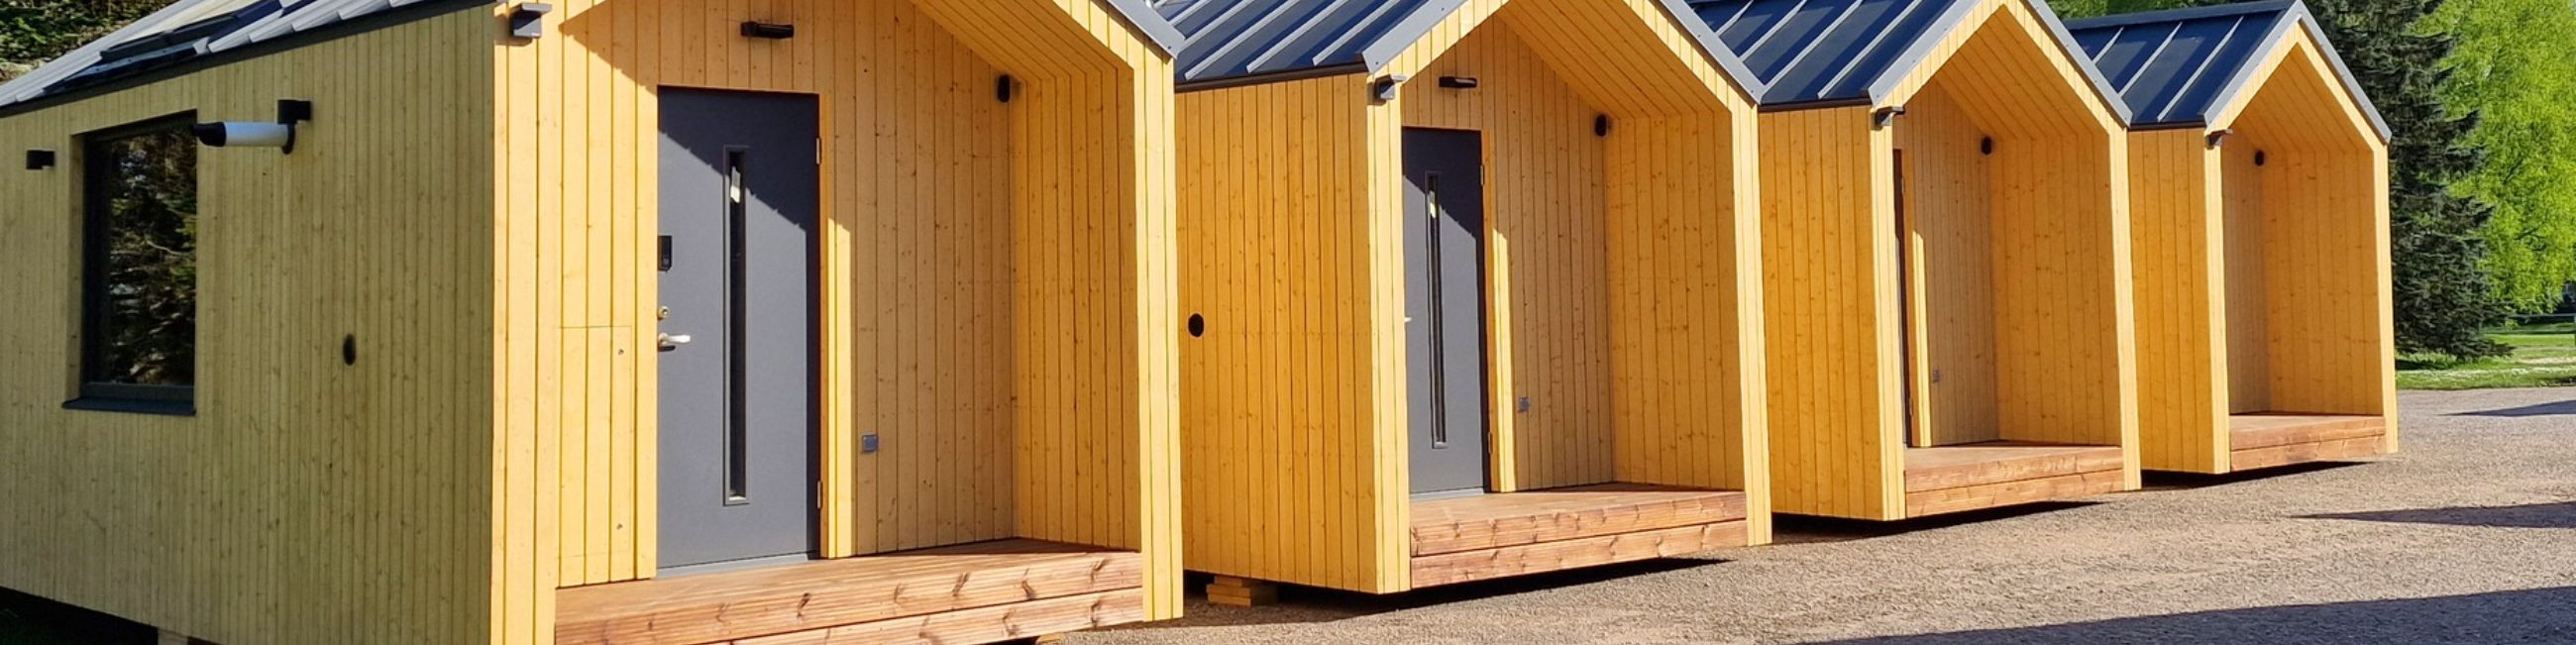 modular houses, prefabricated wooden buildings, adhesive log buildings, sauna houses, construction services, log houses, Saunas, Outdoor toilet facilities, Specific projects, room element house